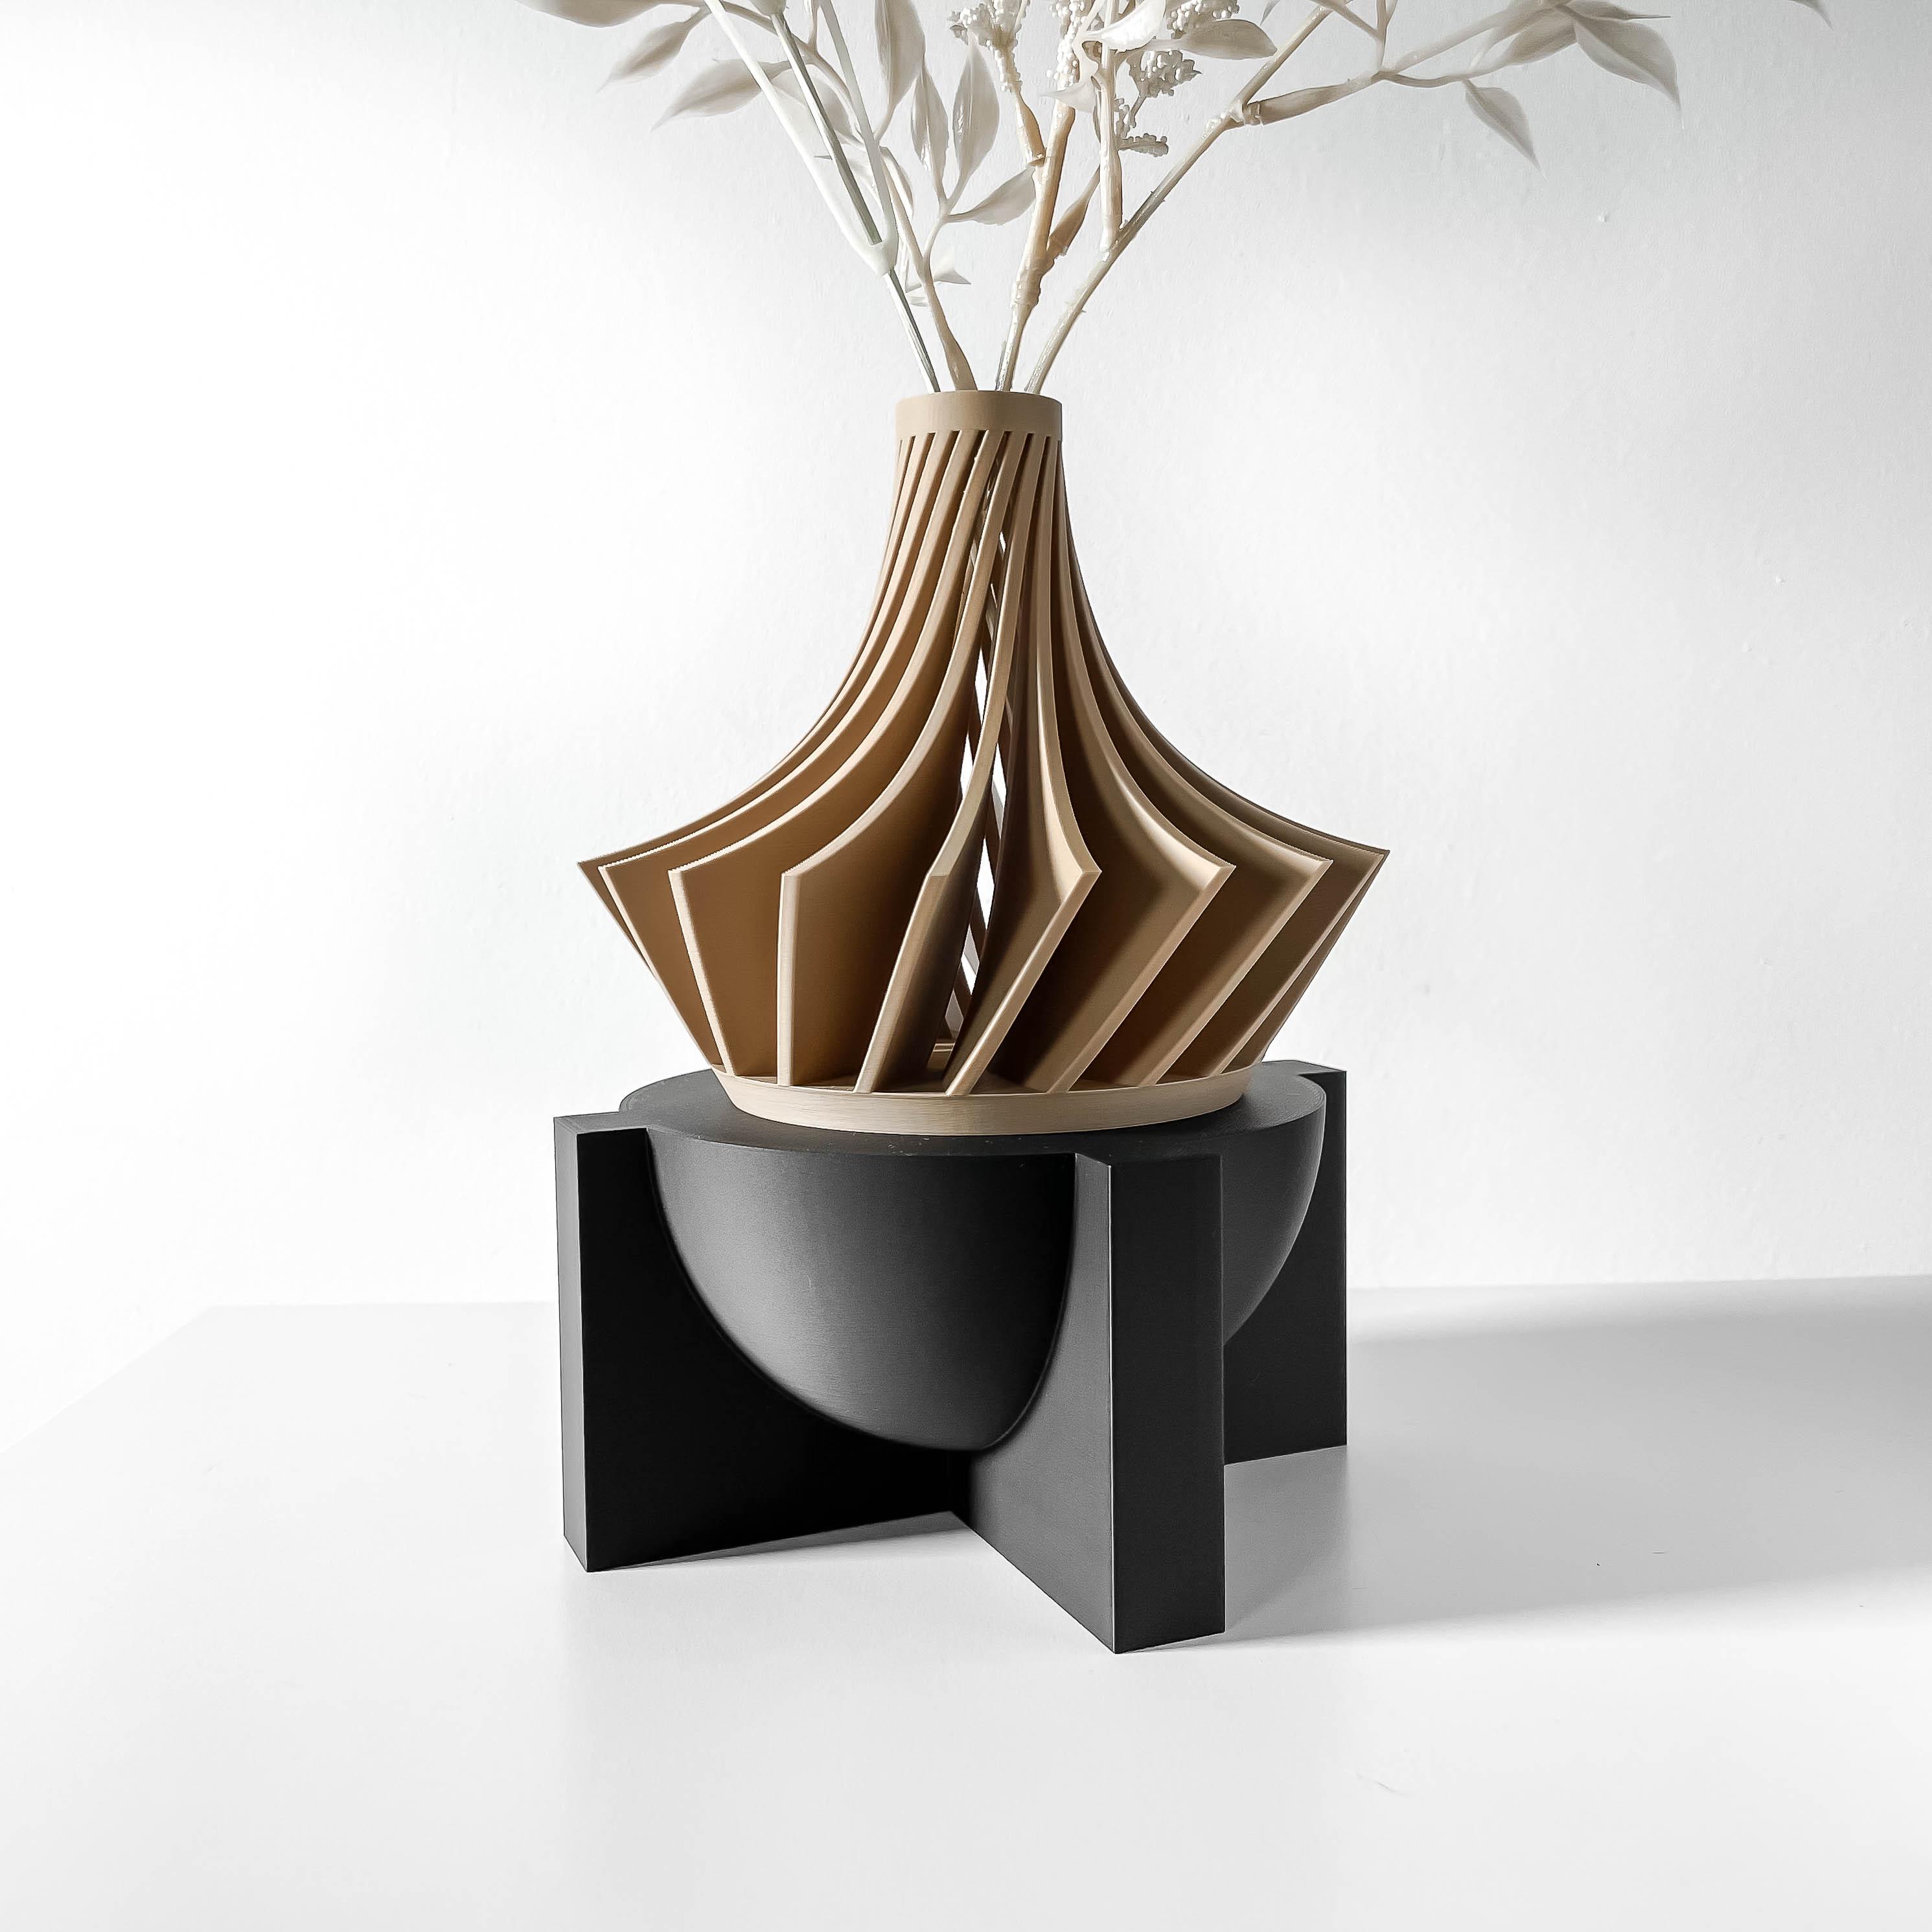 The Lasi Display Stand for Unique Items, Candles, or Plants | Modern Home Decor 3d model